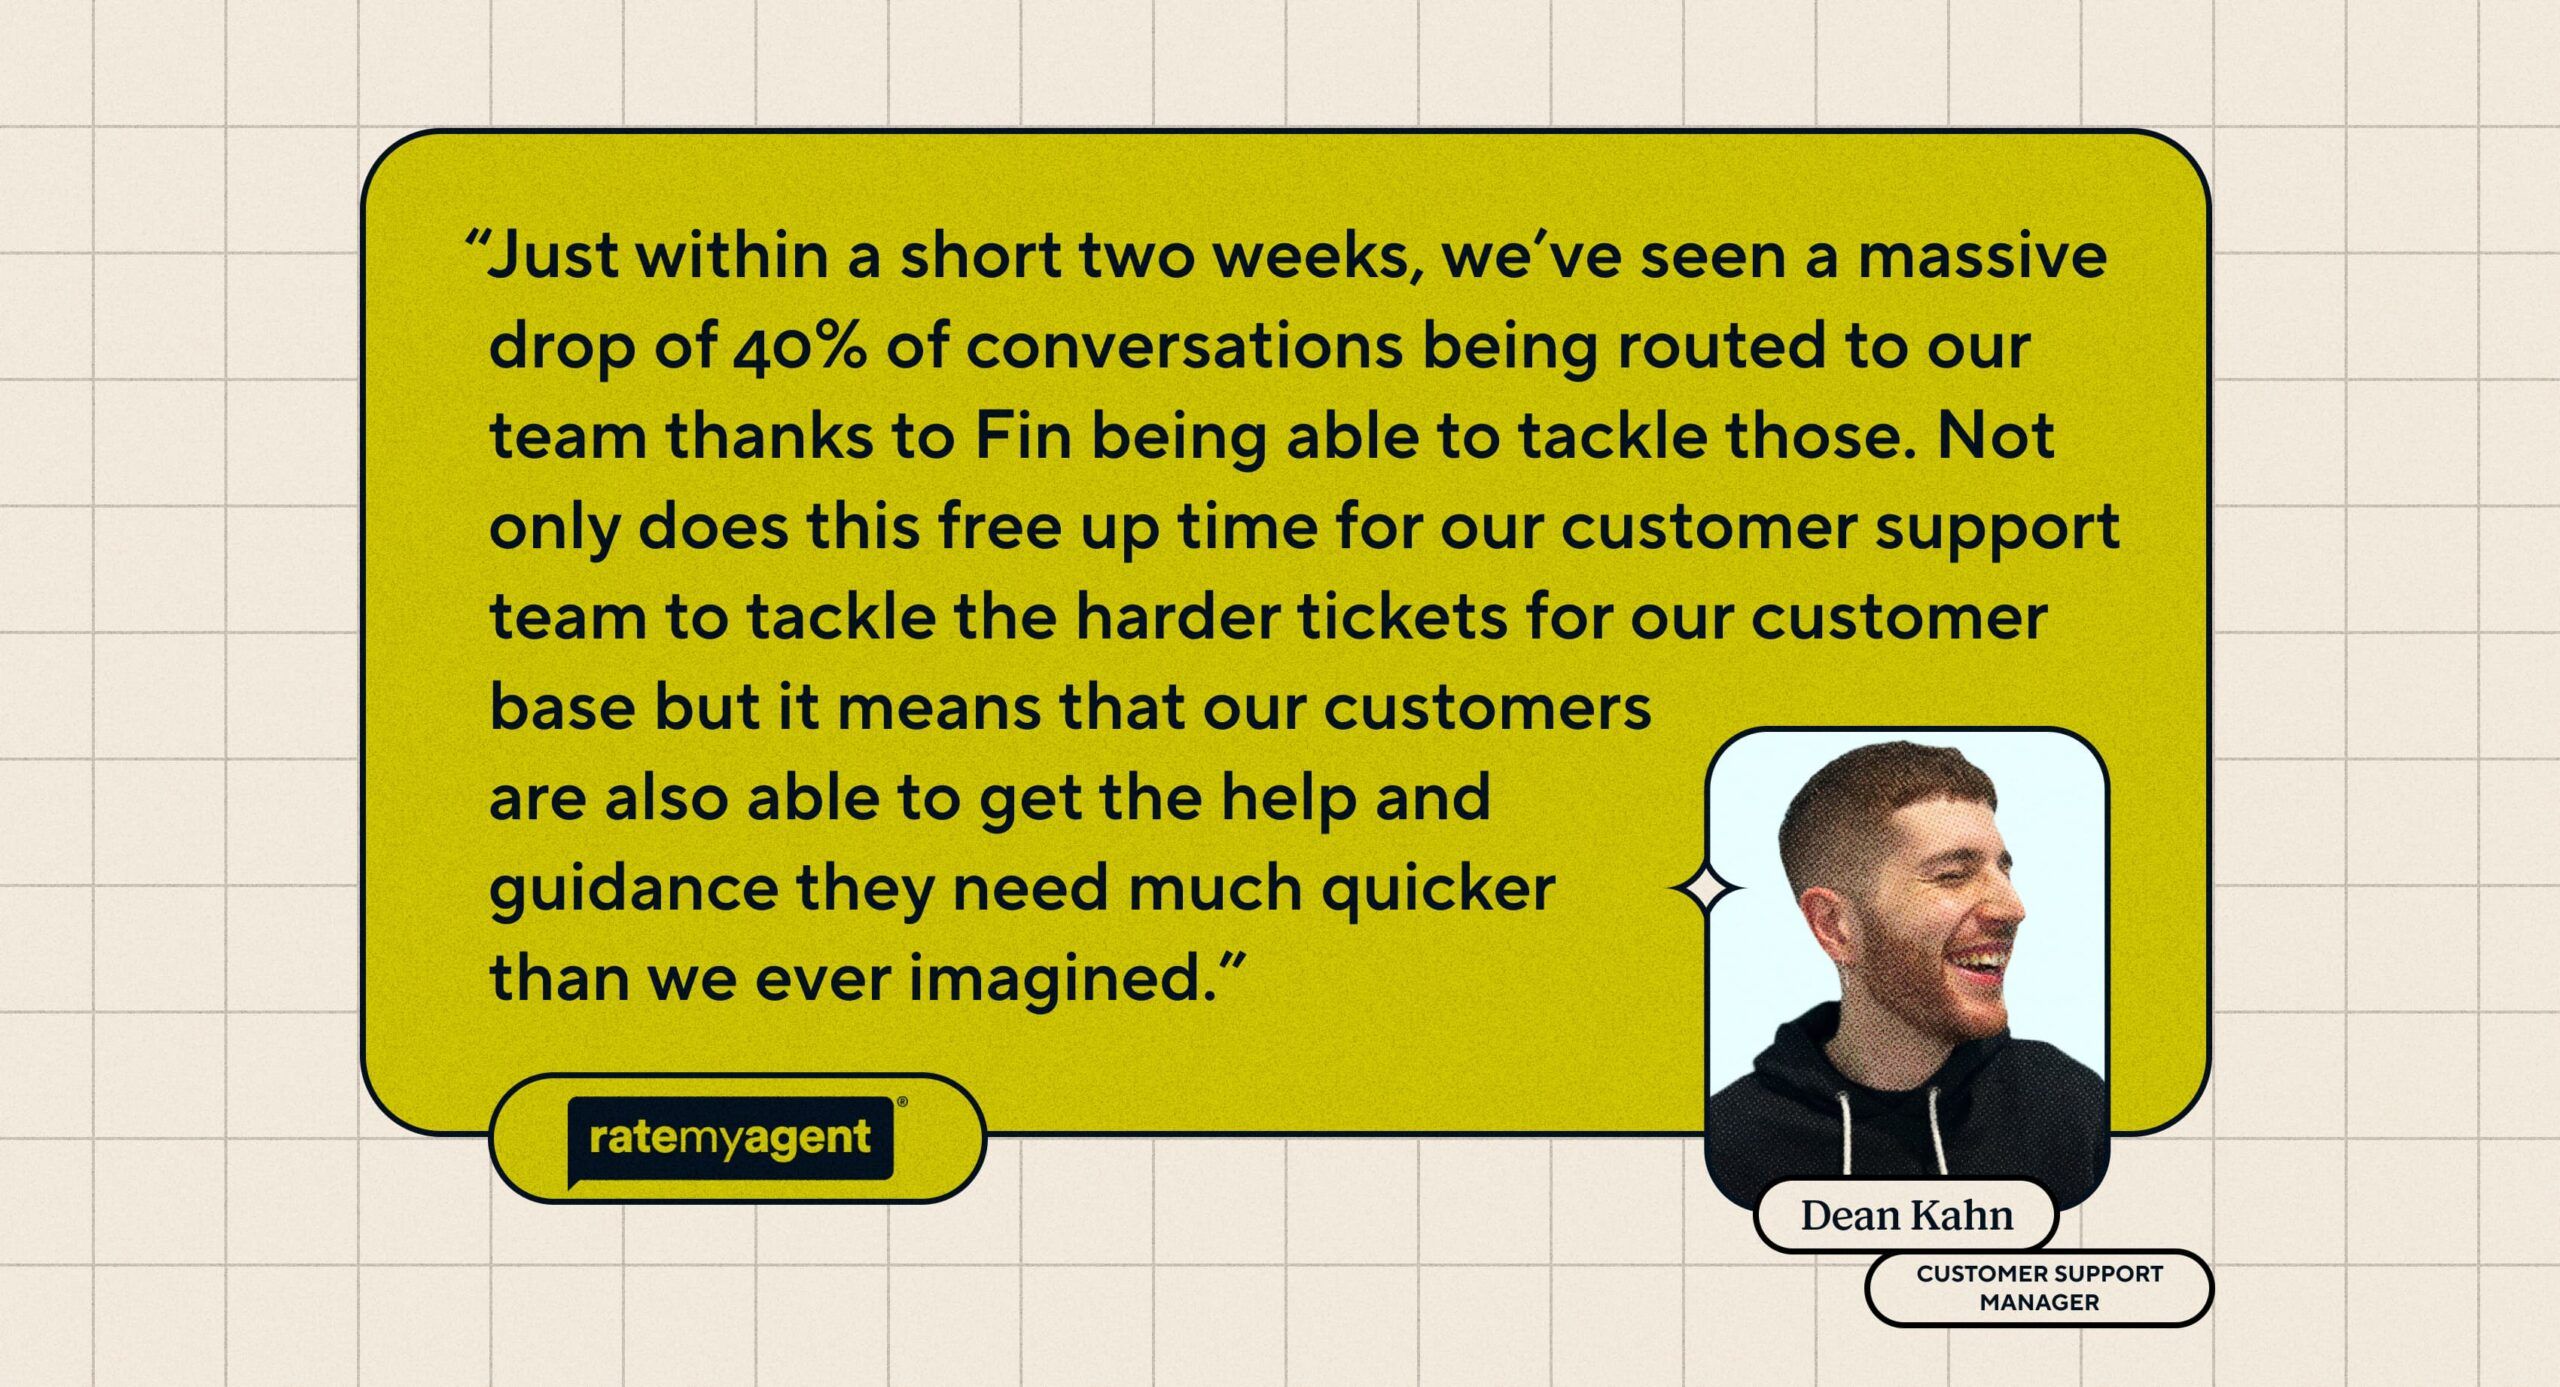 Quote: “Just within a short two weeks, we've seen a massive drop of 40% of conversations being routed to our team thanks to Fin being able to tackle those. Not only does this free up time for our customer support team to tackle the harder tickets for our customer base but it means that our customers are also able to get the help and guidance they need much quicker than we ever imagined." Dean Kahn, Customer Support Manager at RateMyAgent.